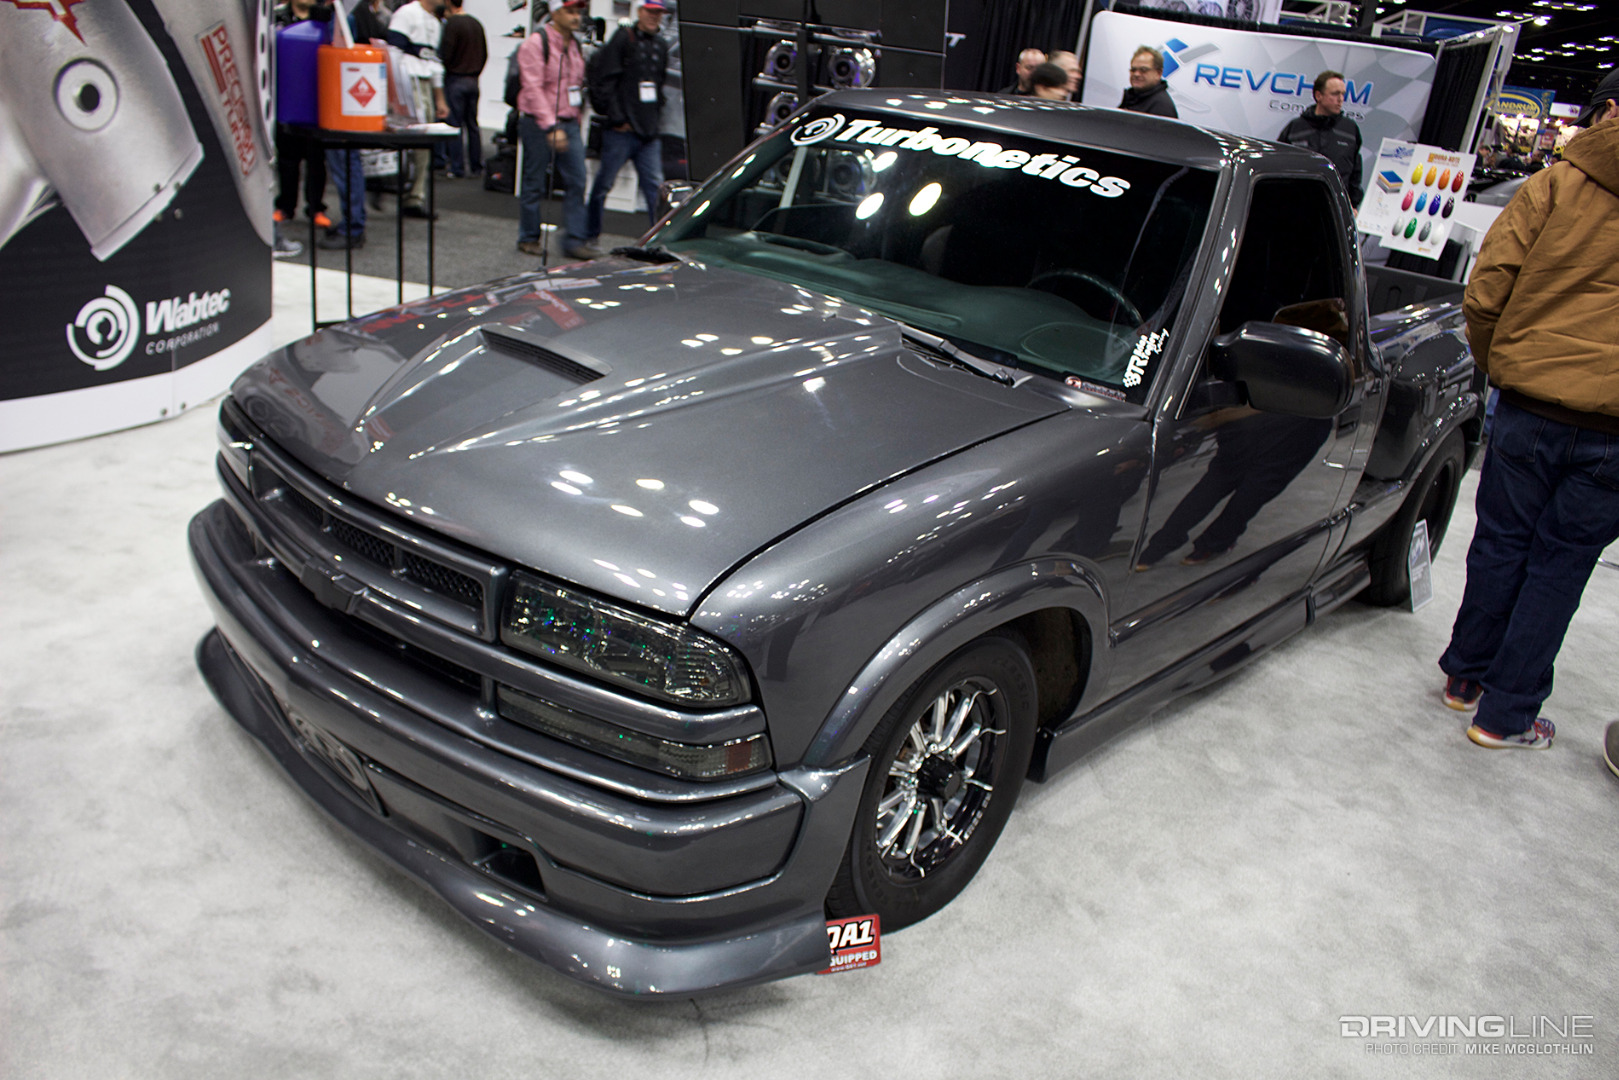 2016 PRI Trade Show: The Fastest of Fast Cars, Part 2 